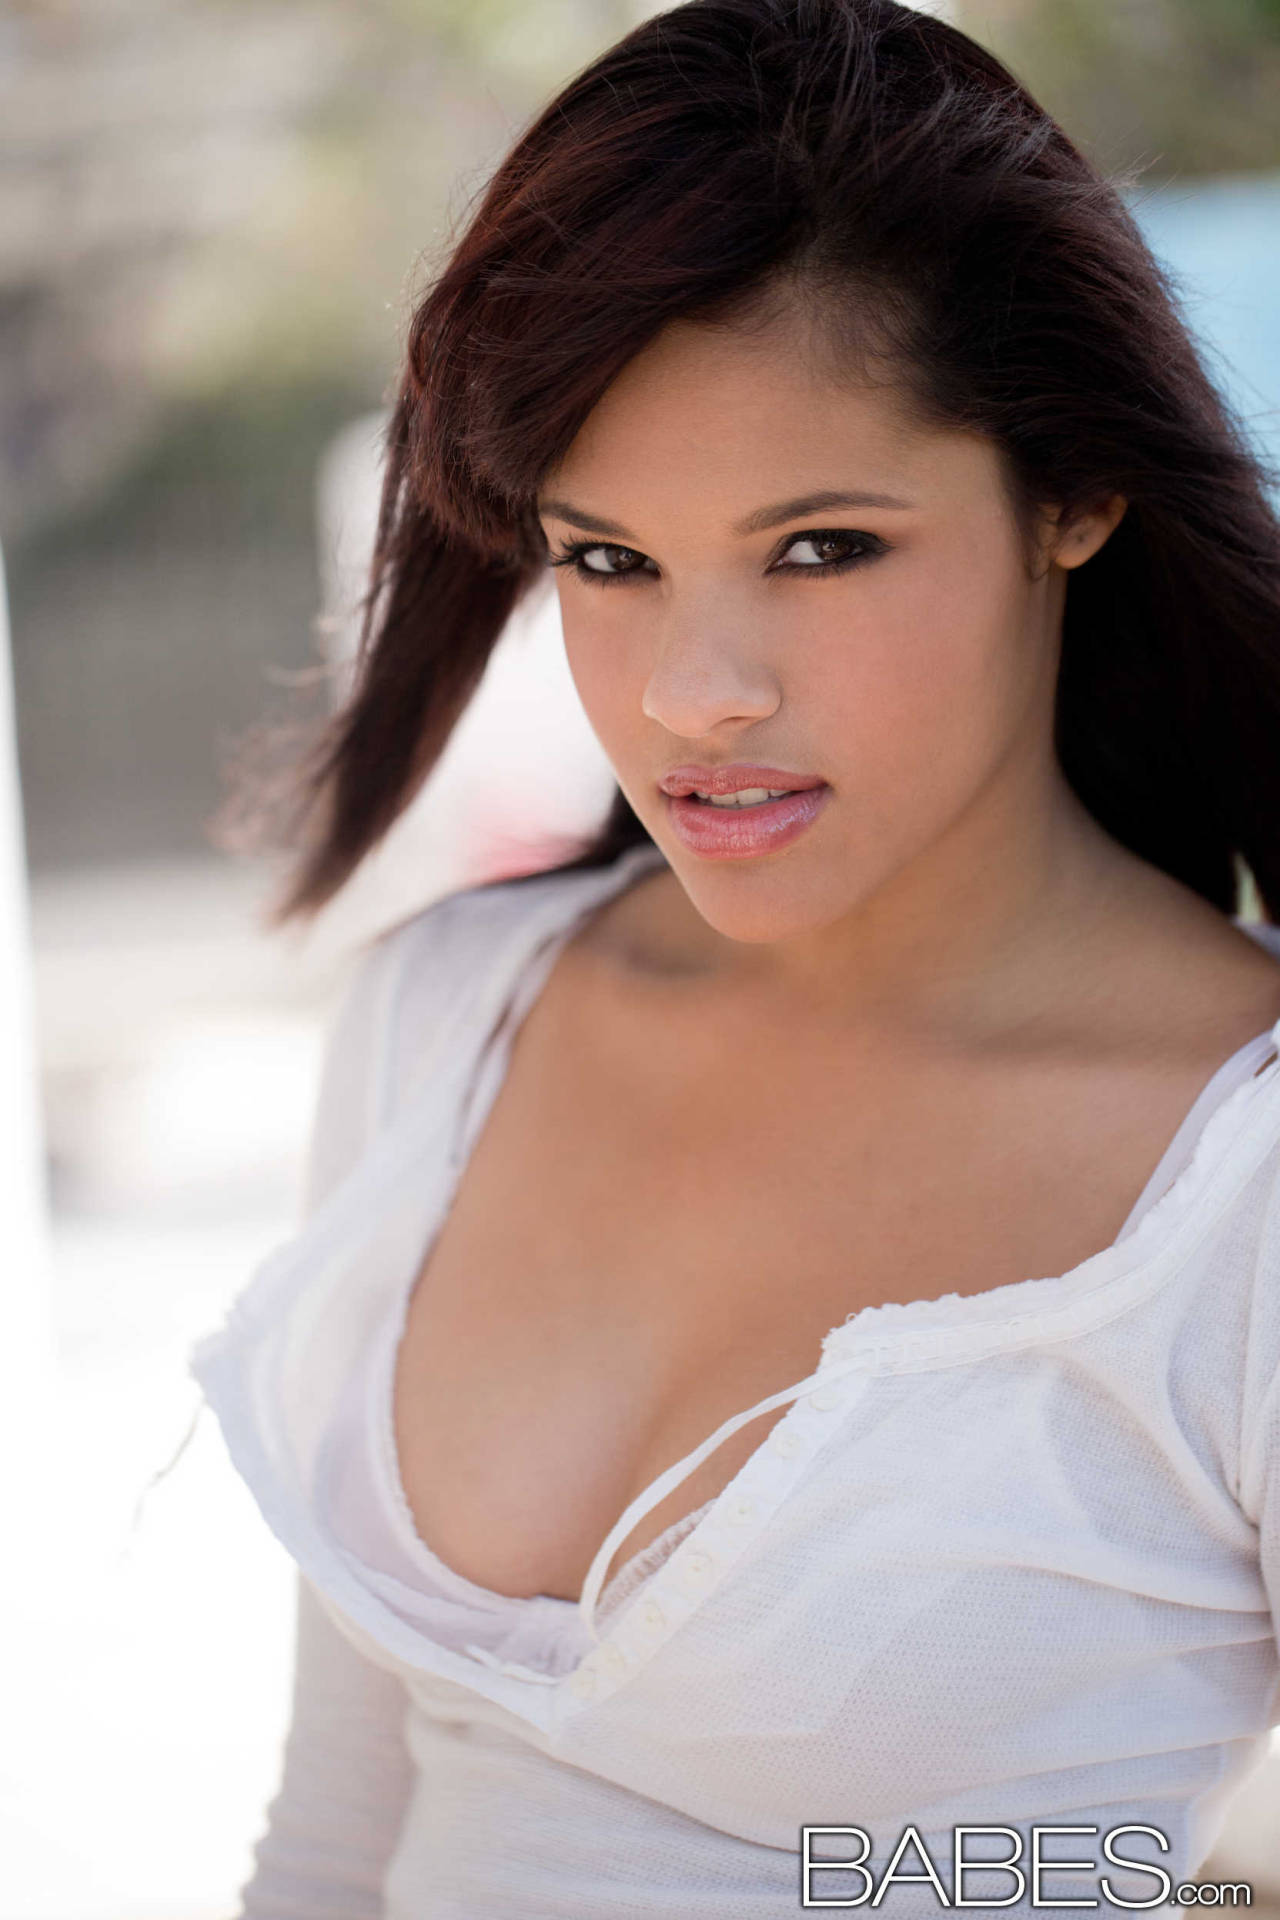 babescom:  Aria Salazar&rsquo;s booked the day off work, and she can&rsquo;t